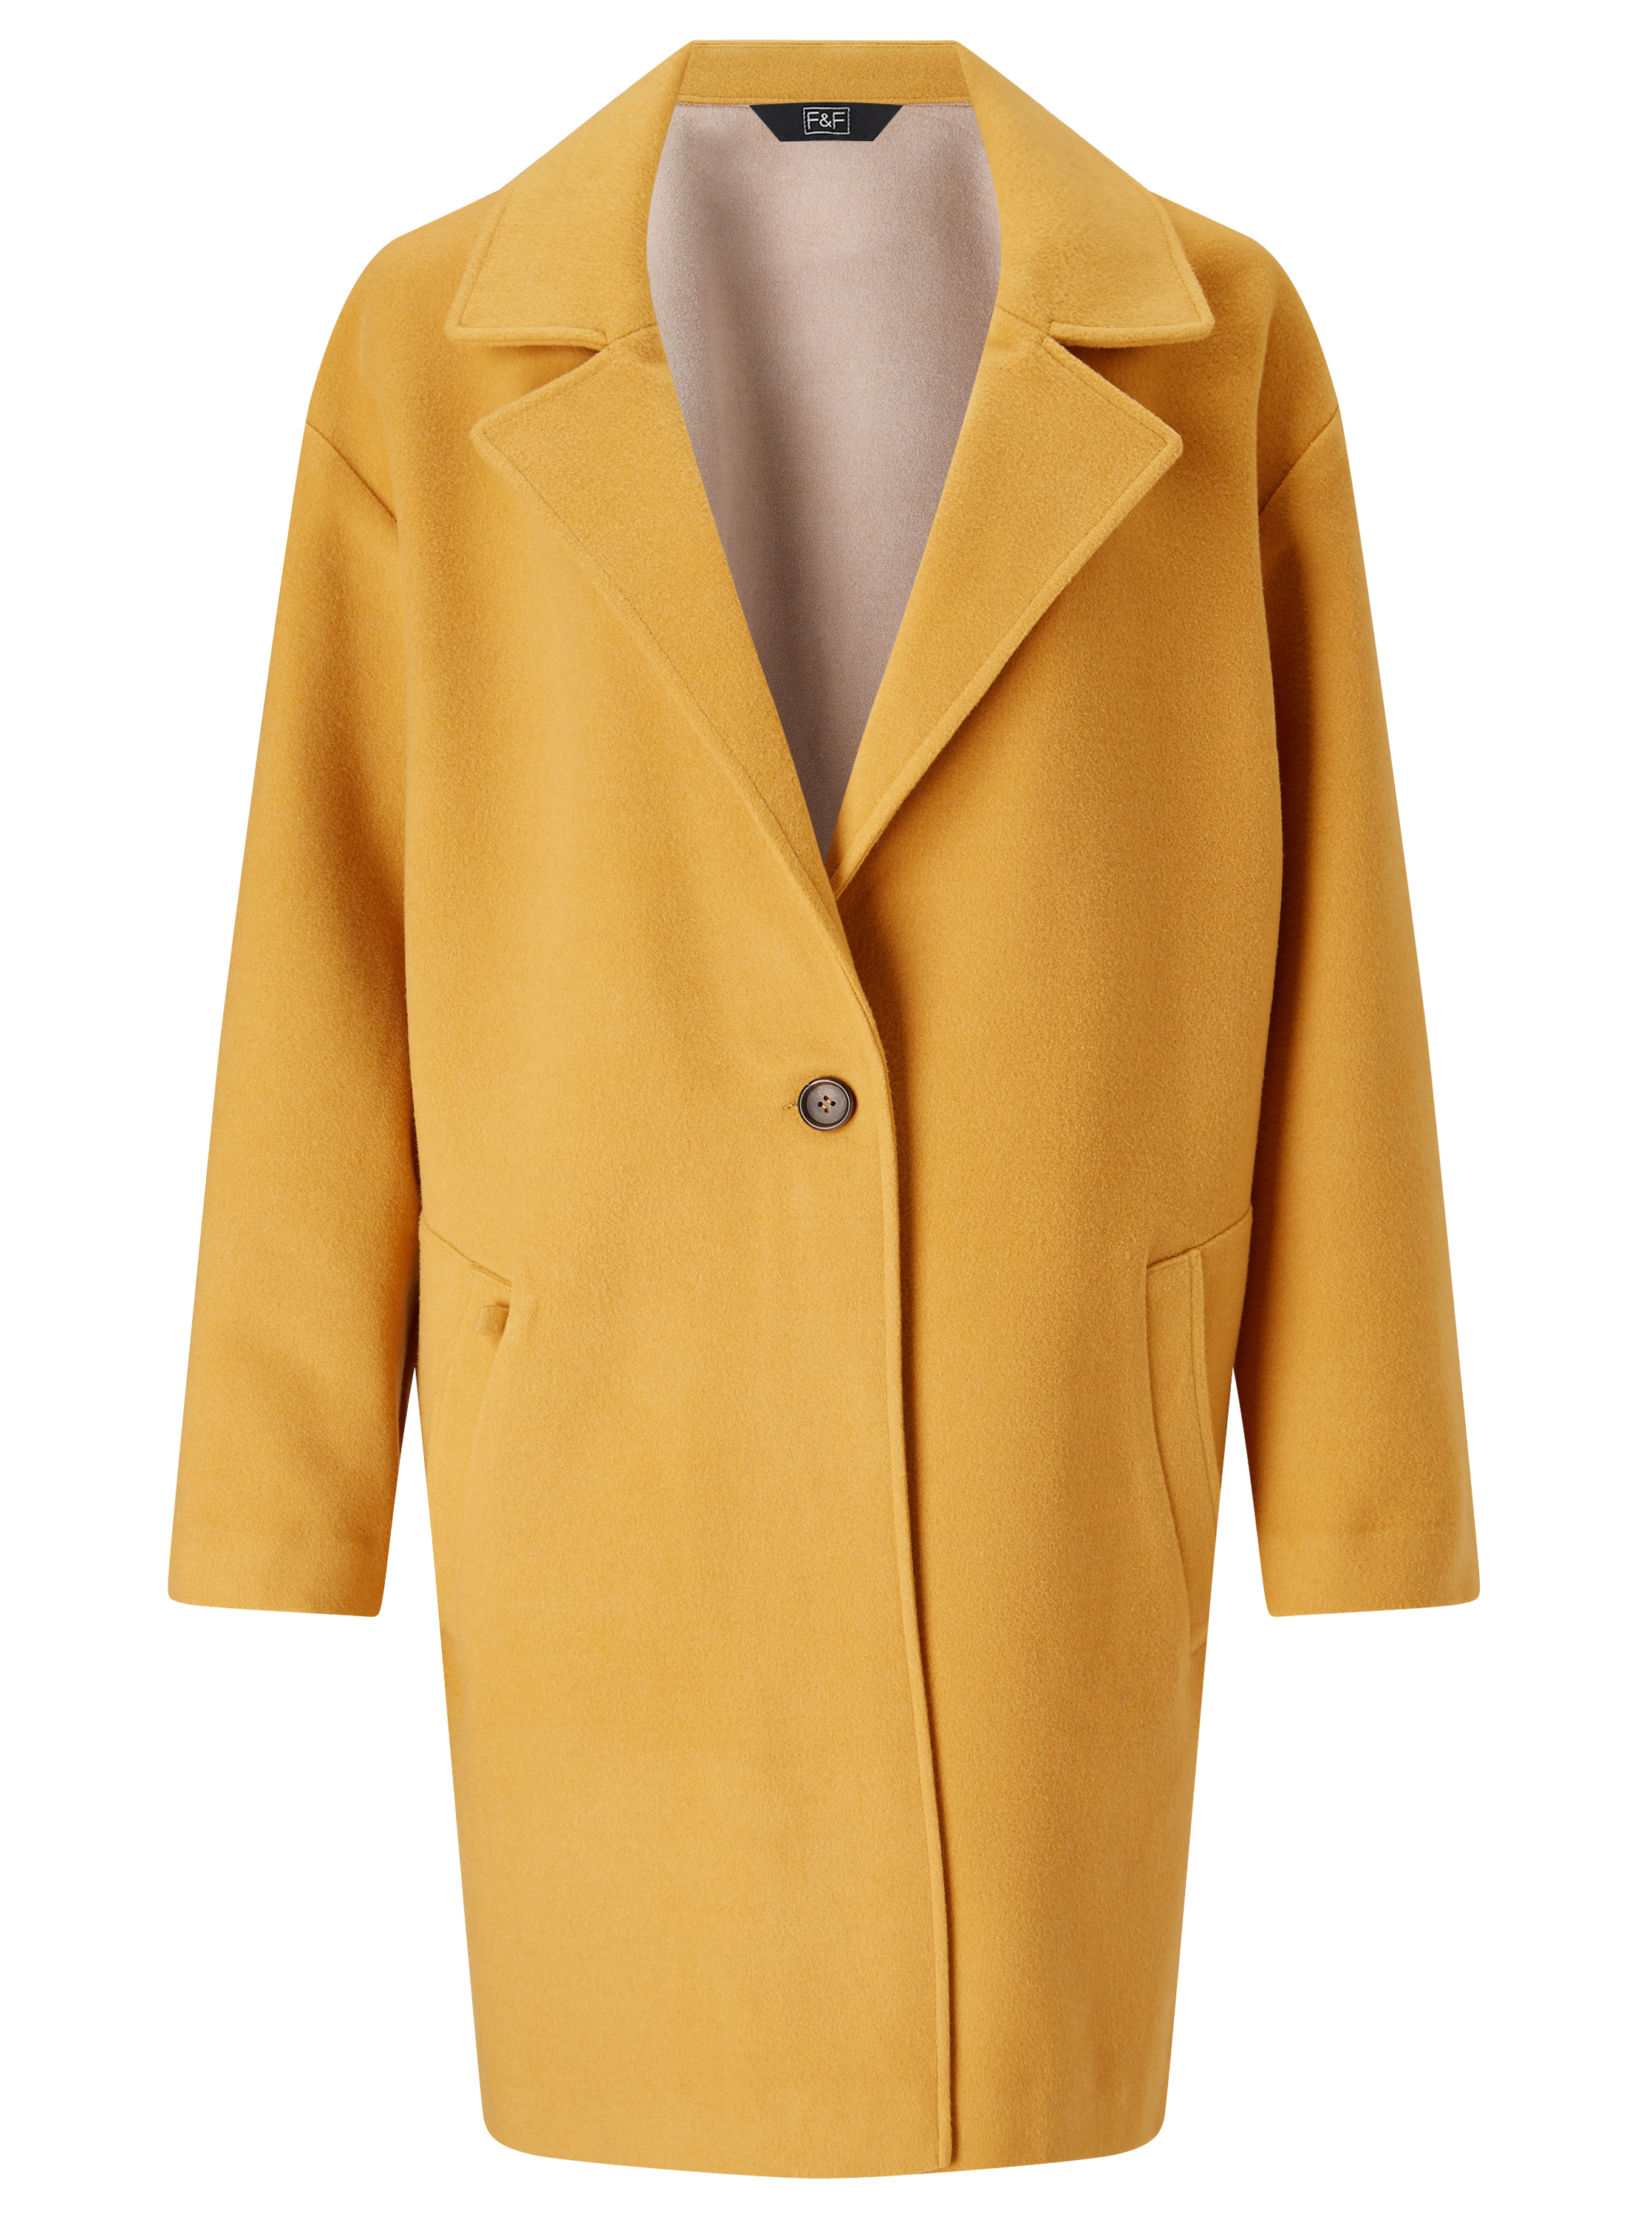 Supermarket fashion - Mustard coat, £39, F&F - Woman And Home